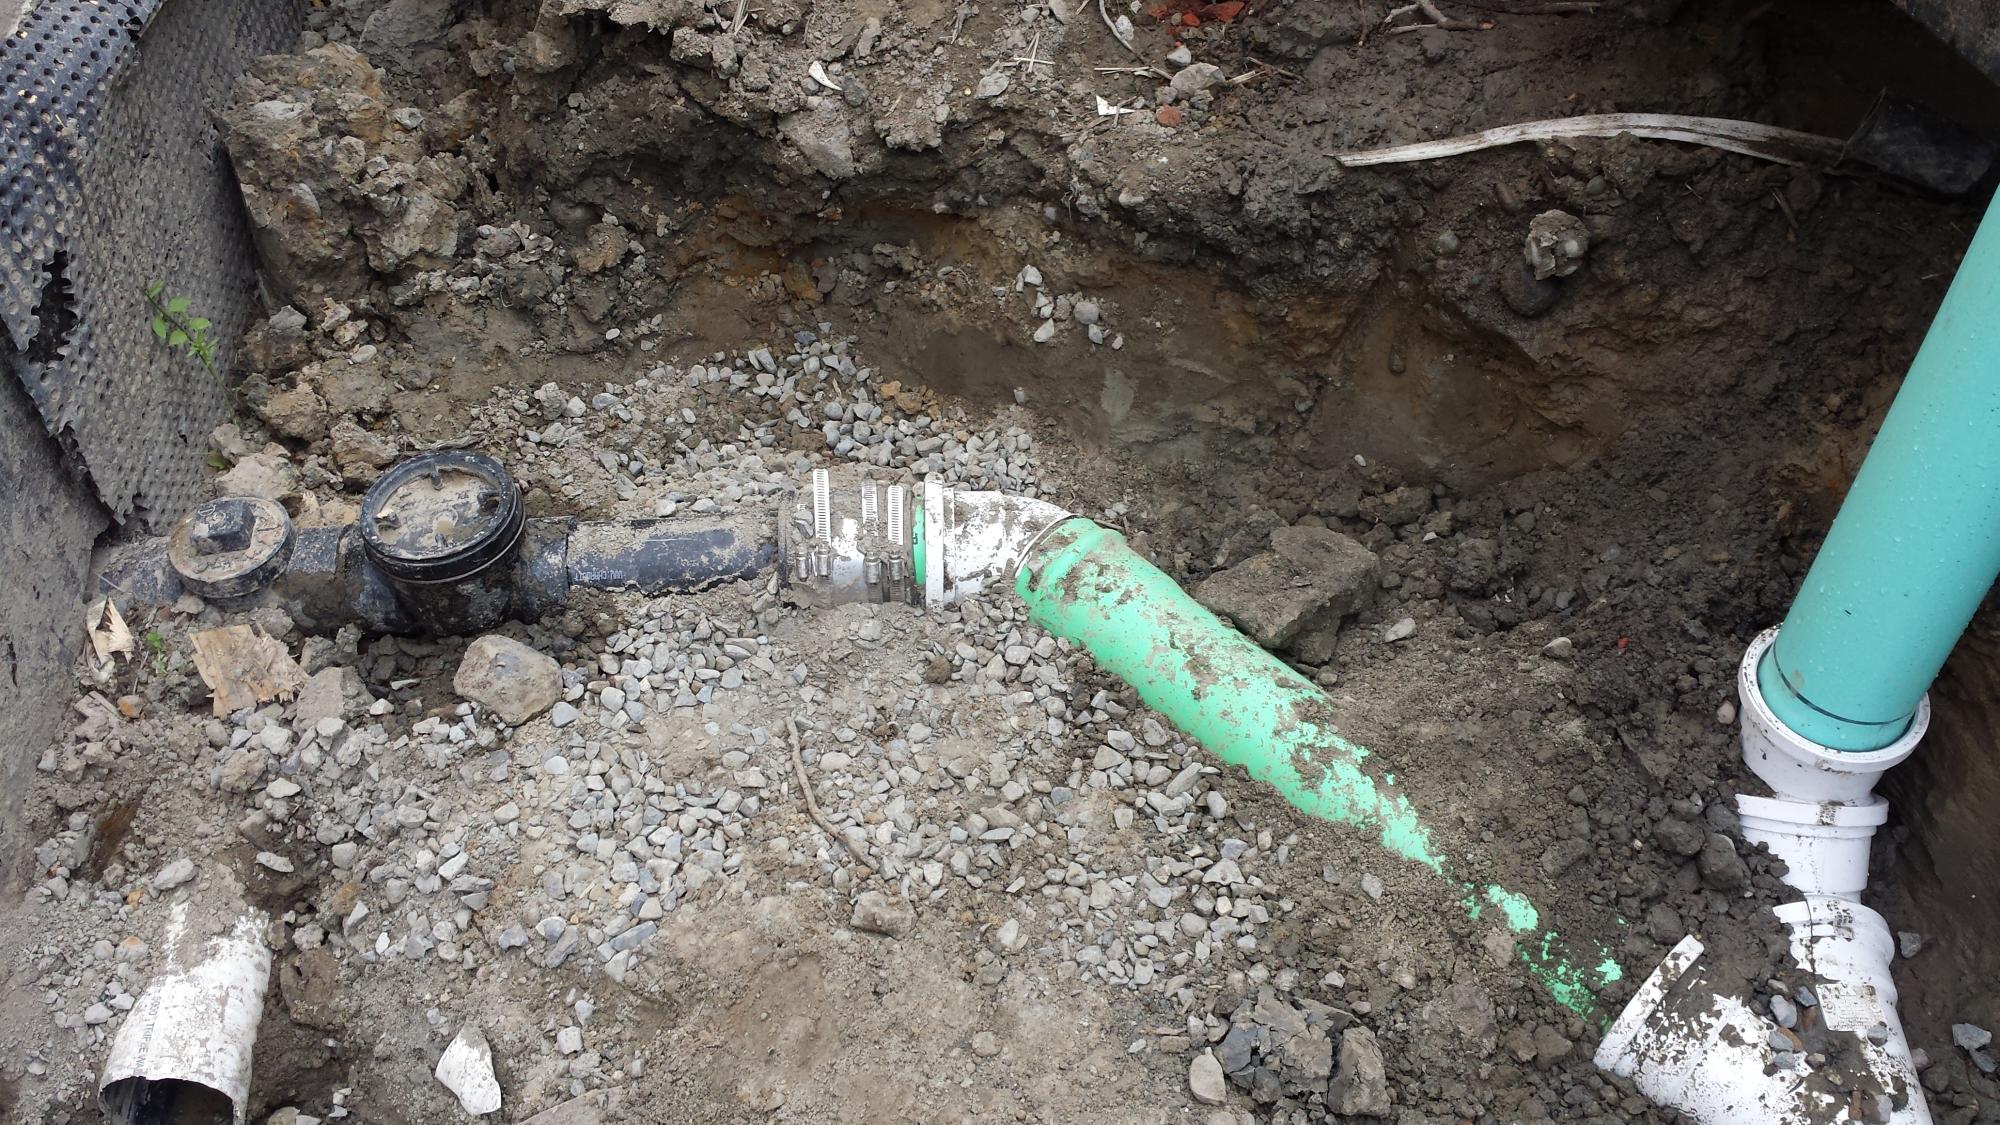 Water, Sewer &amp; Drain Issues, Installation or Repairs in Seattle, WA